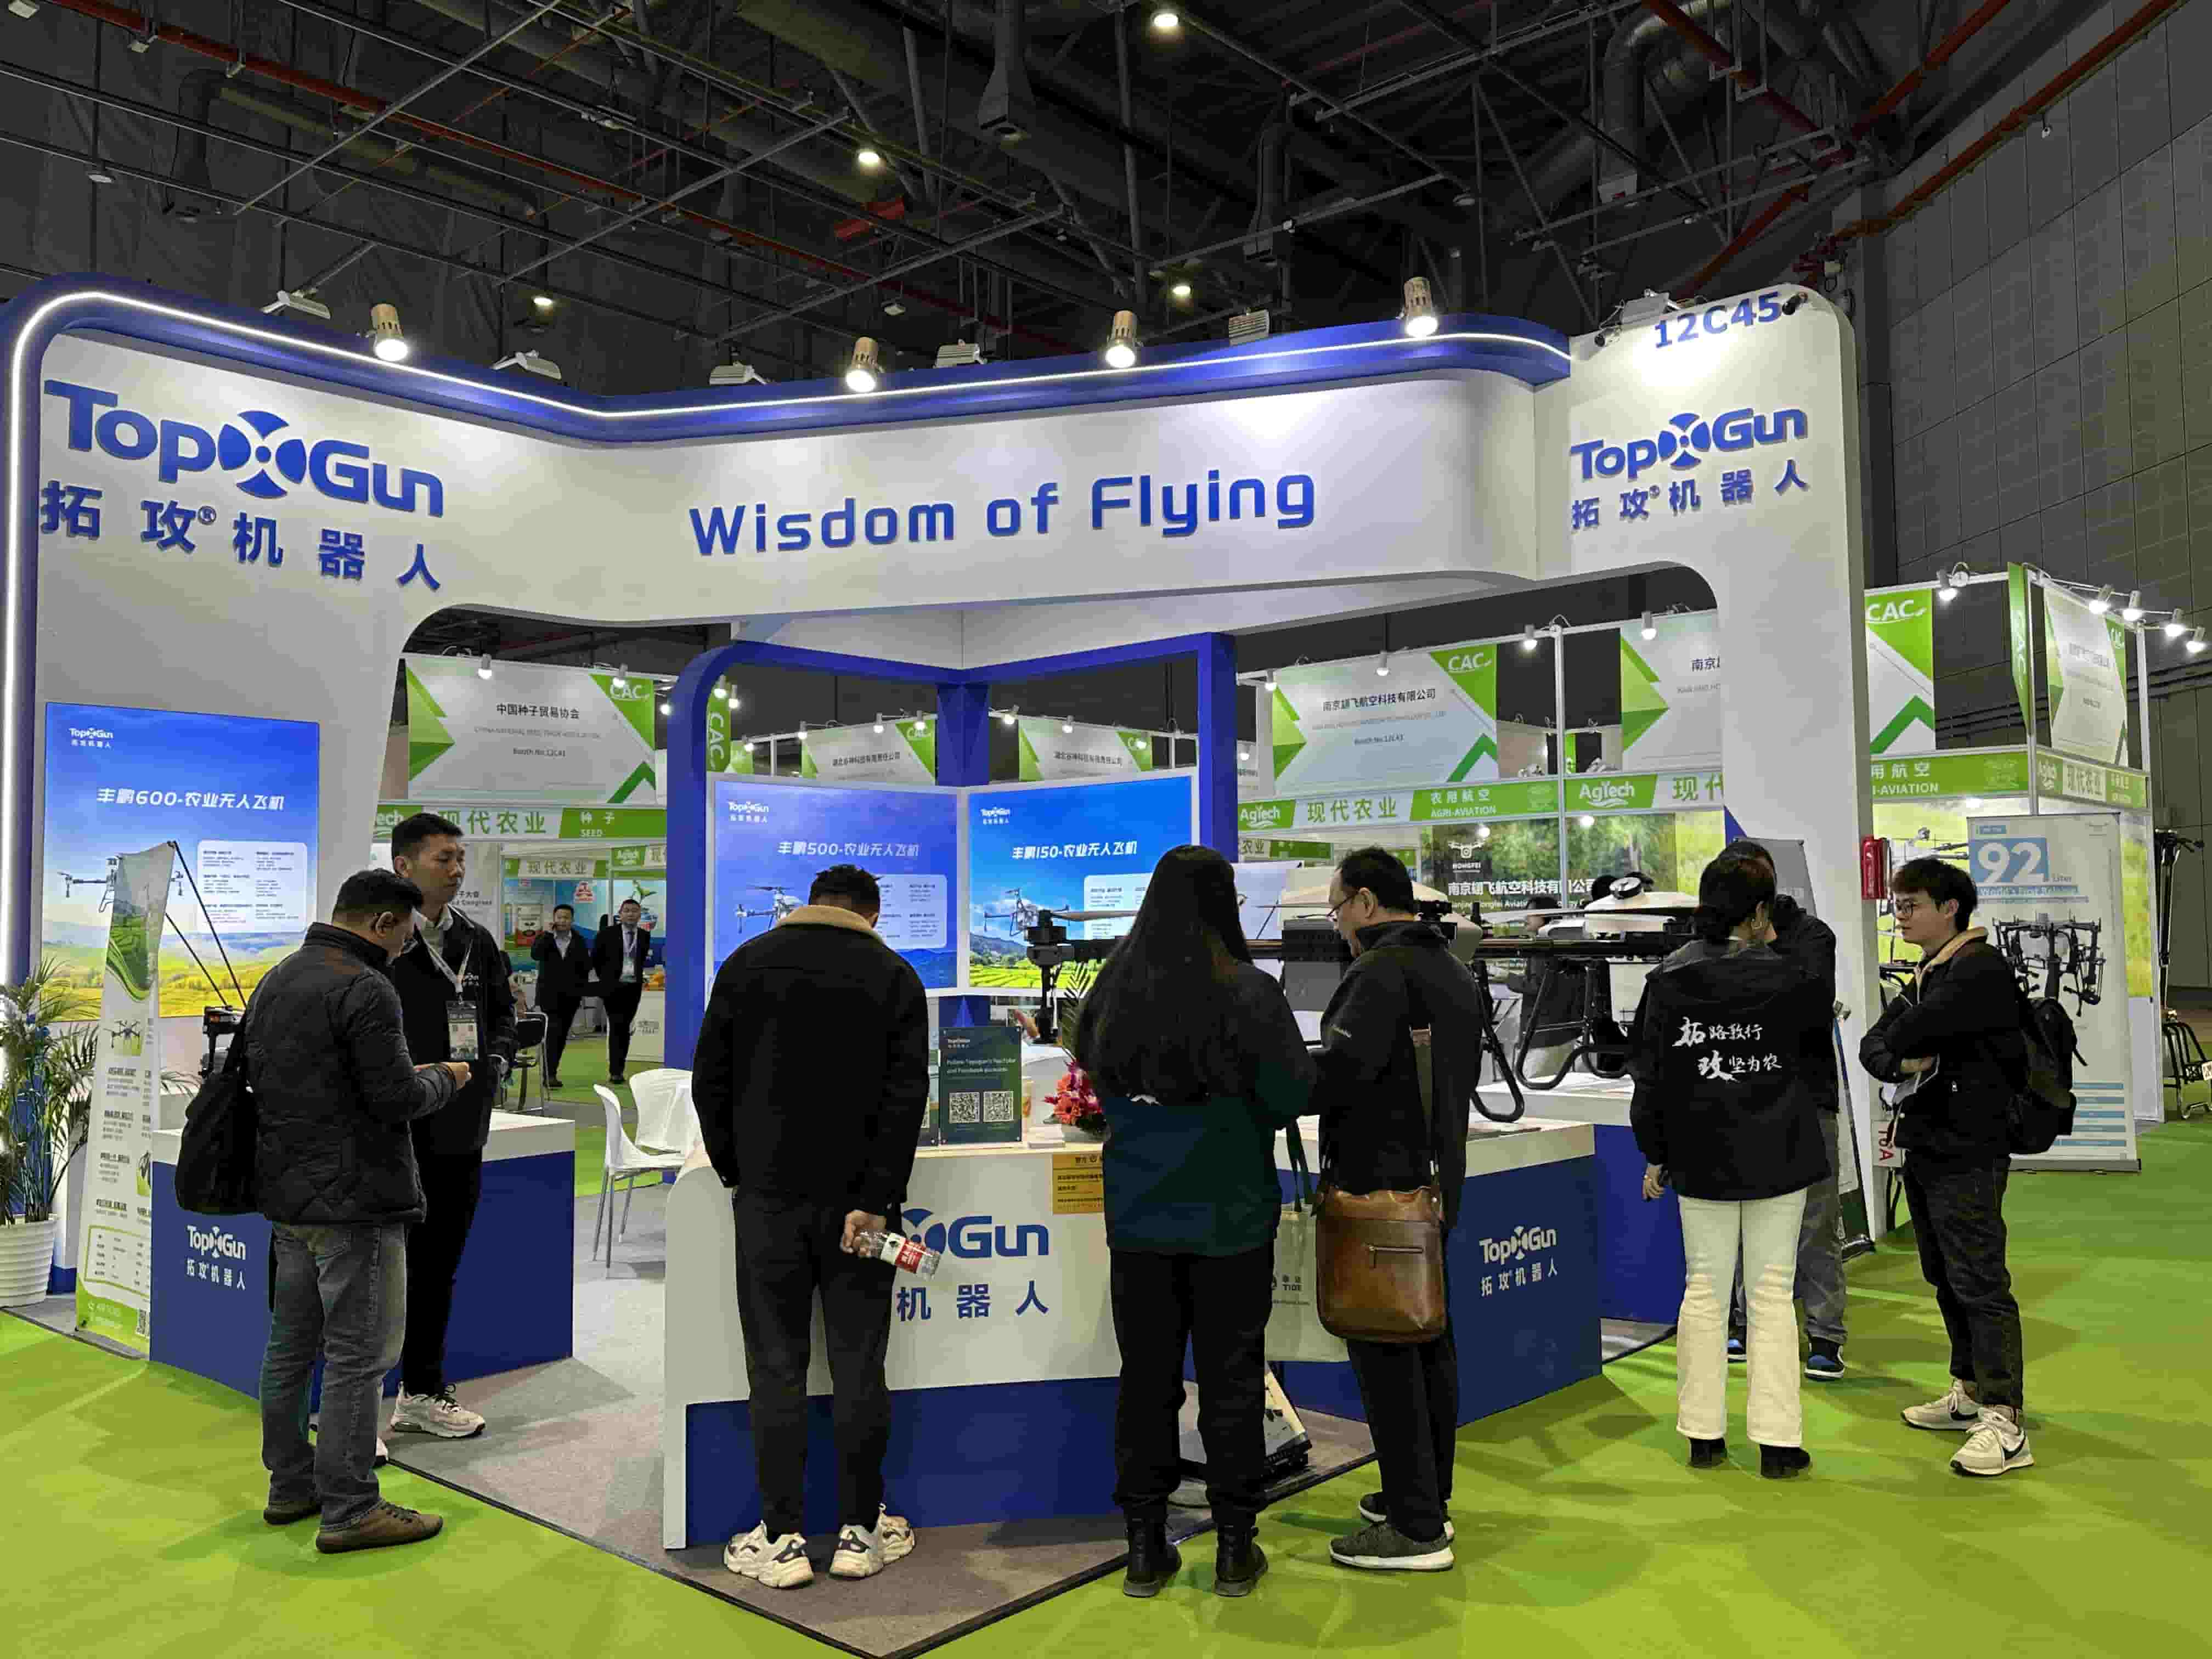 Topxgun Agriculture Drones Attract Visitors From All Over the World at Agriculture Industry Show in China